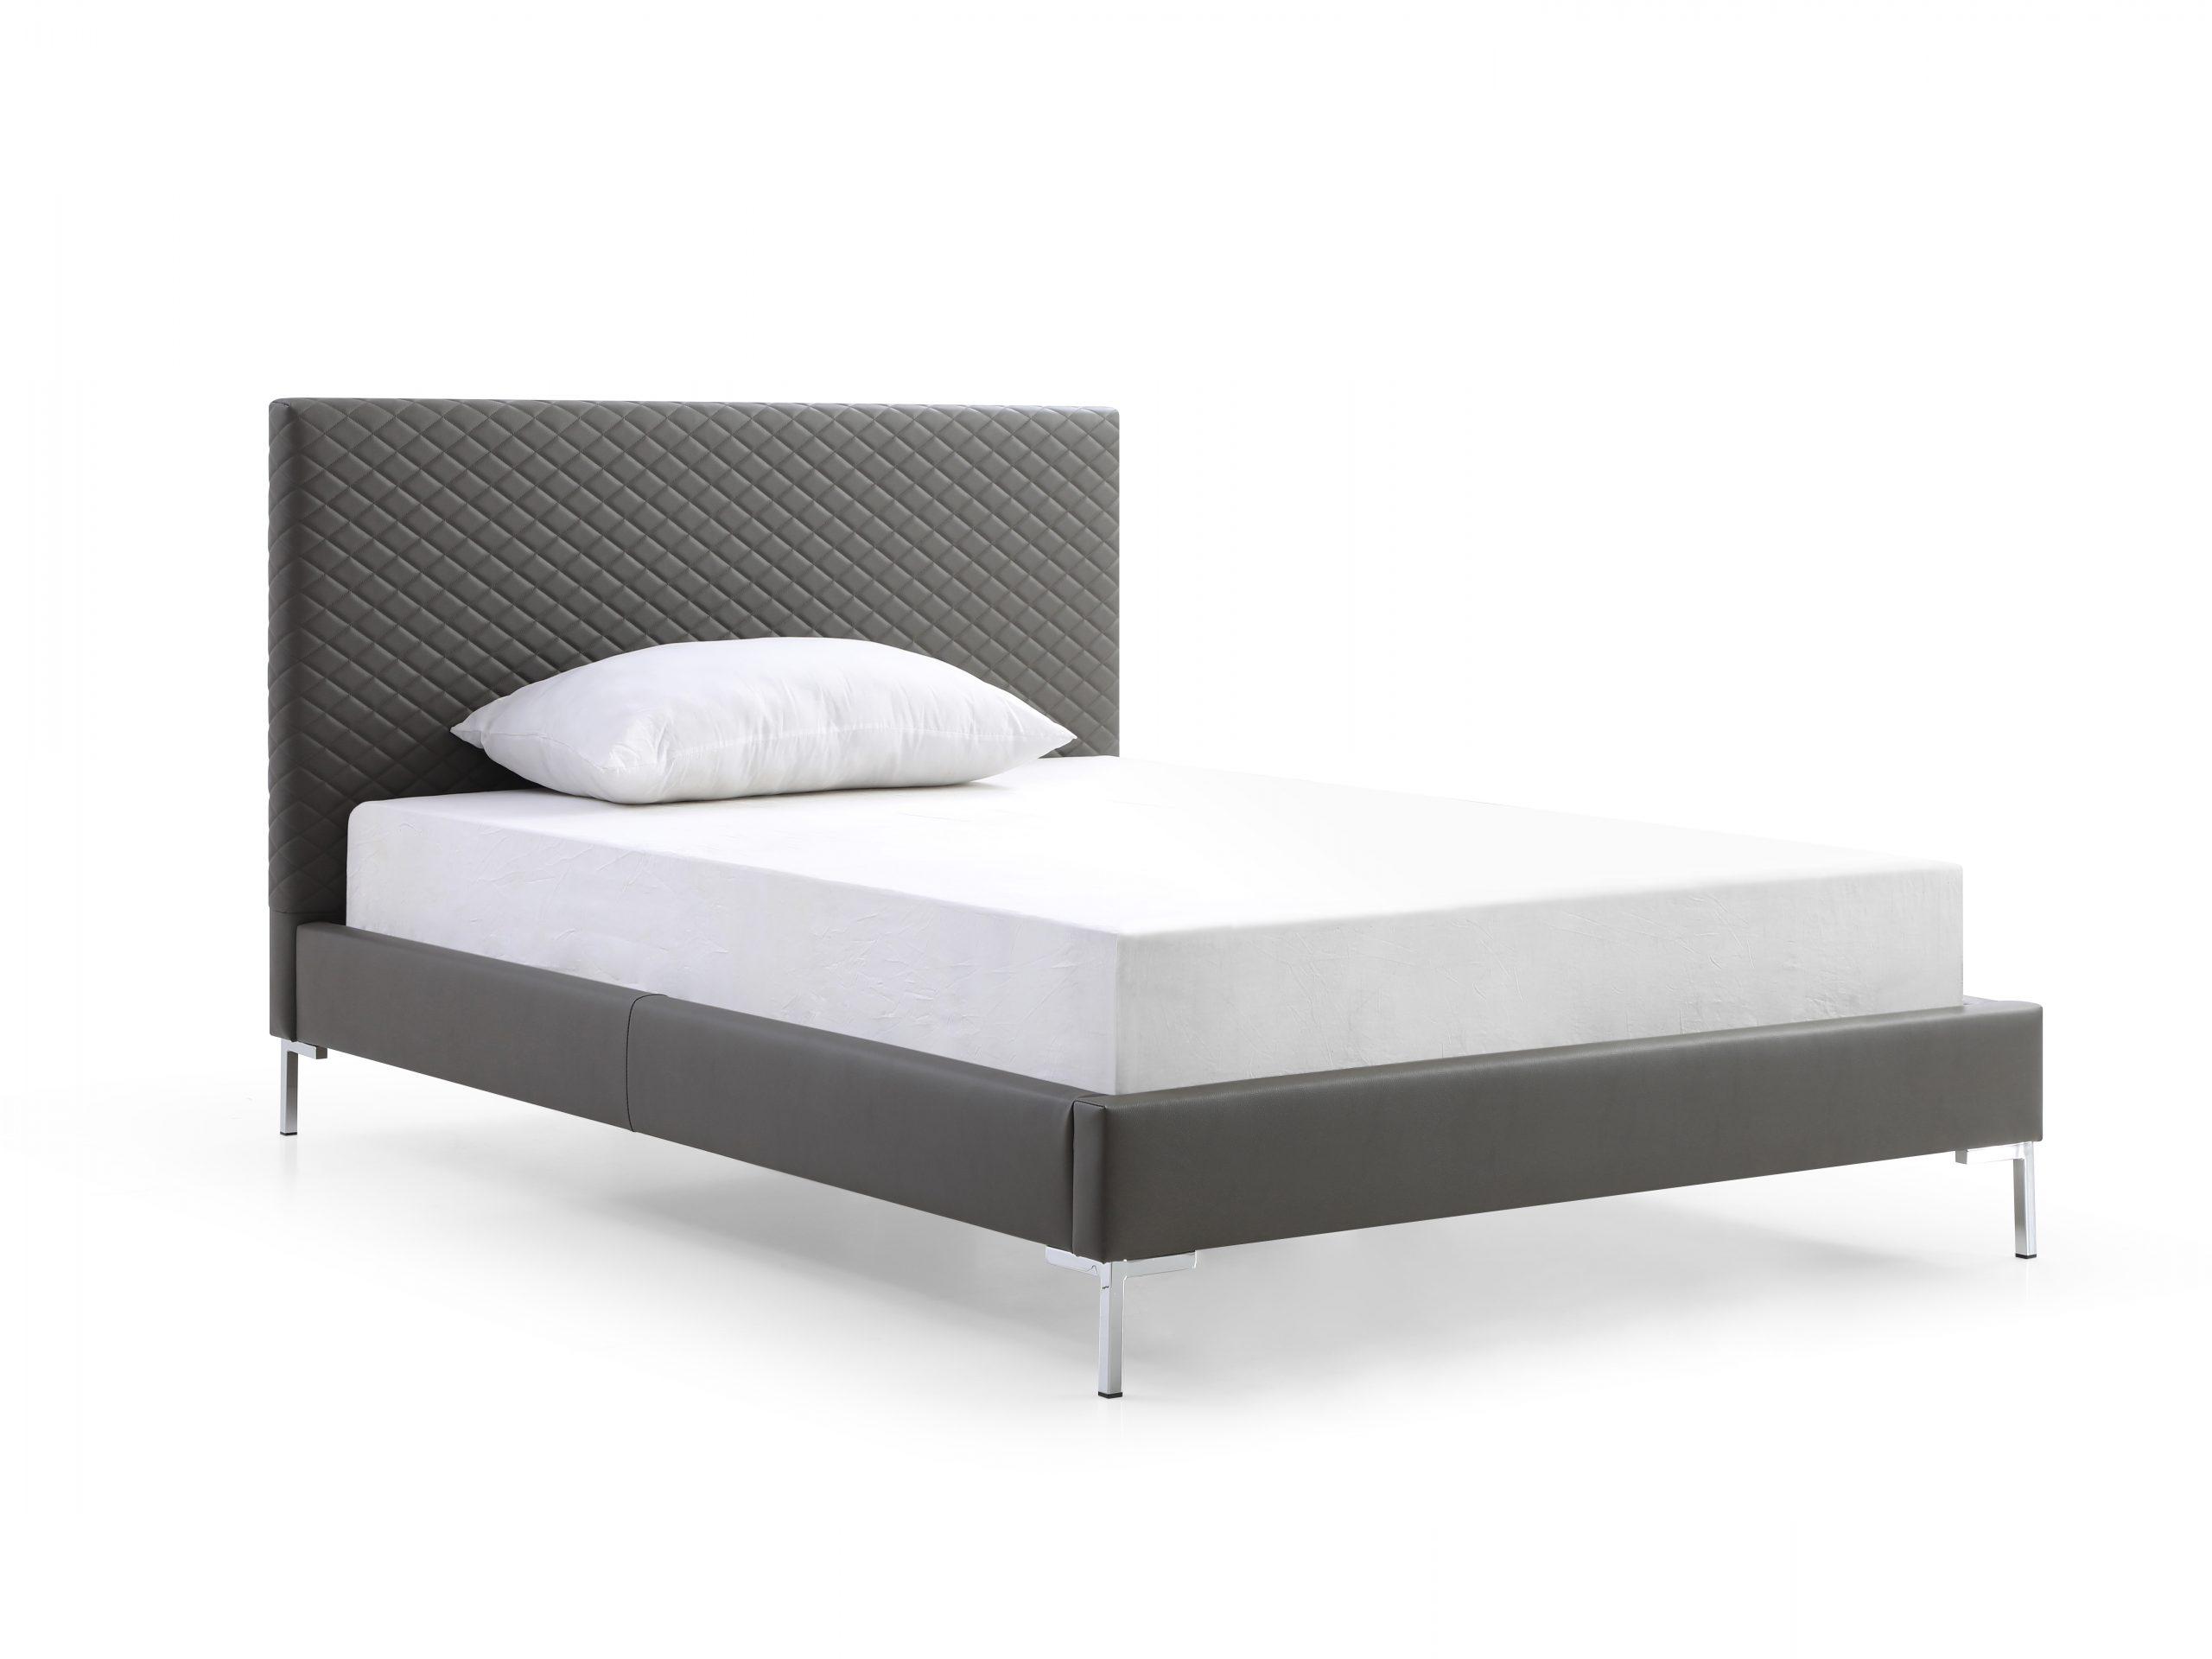 Modern Bed BF1689P-DGRY Liz BF1689P-DGRY in Dark Gray Faux Leather